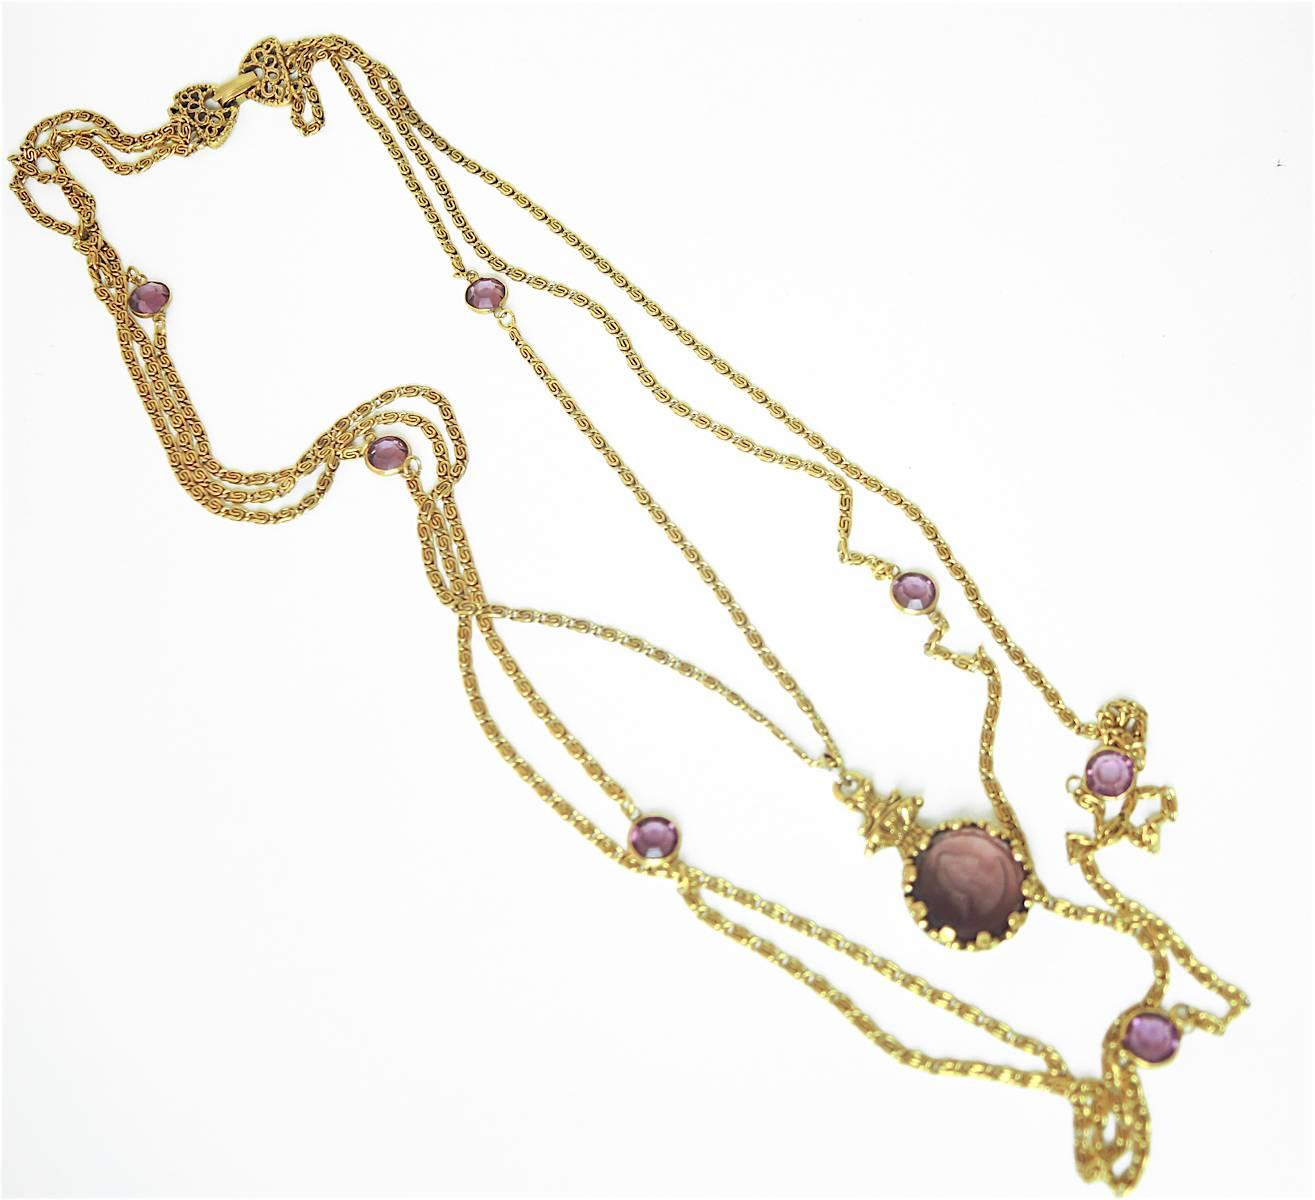 This vintage 1960s Goldette necklace features one chain with a faux amethyst cameo pendant and two more chains with amethyst color discs in a gold-tone setting. The first chain with the cameo measures 24”, the second chain is 30” and the third is